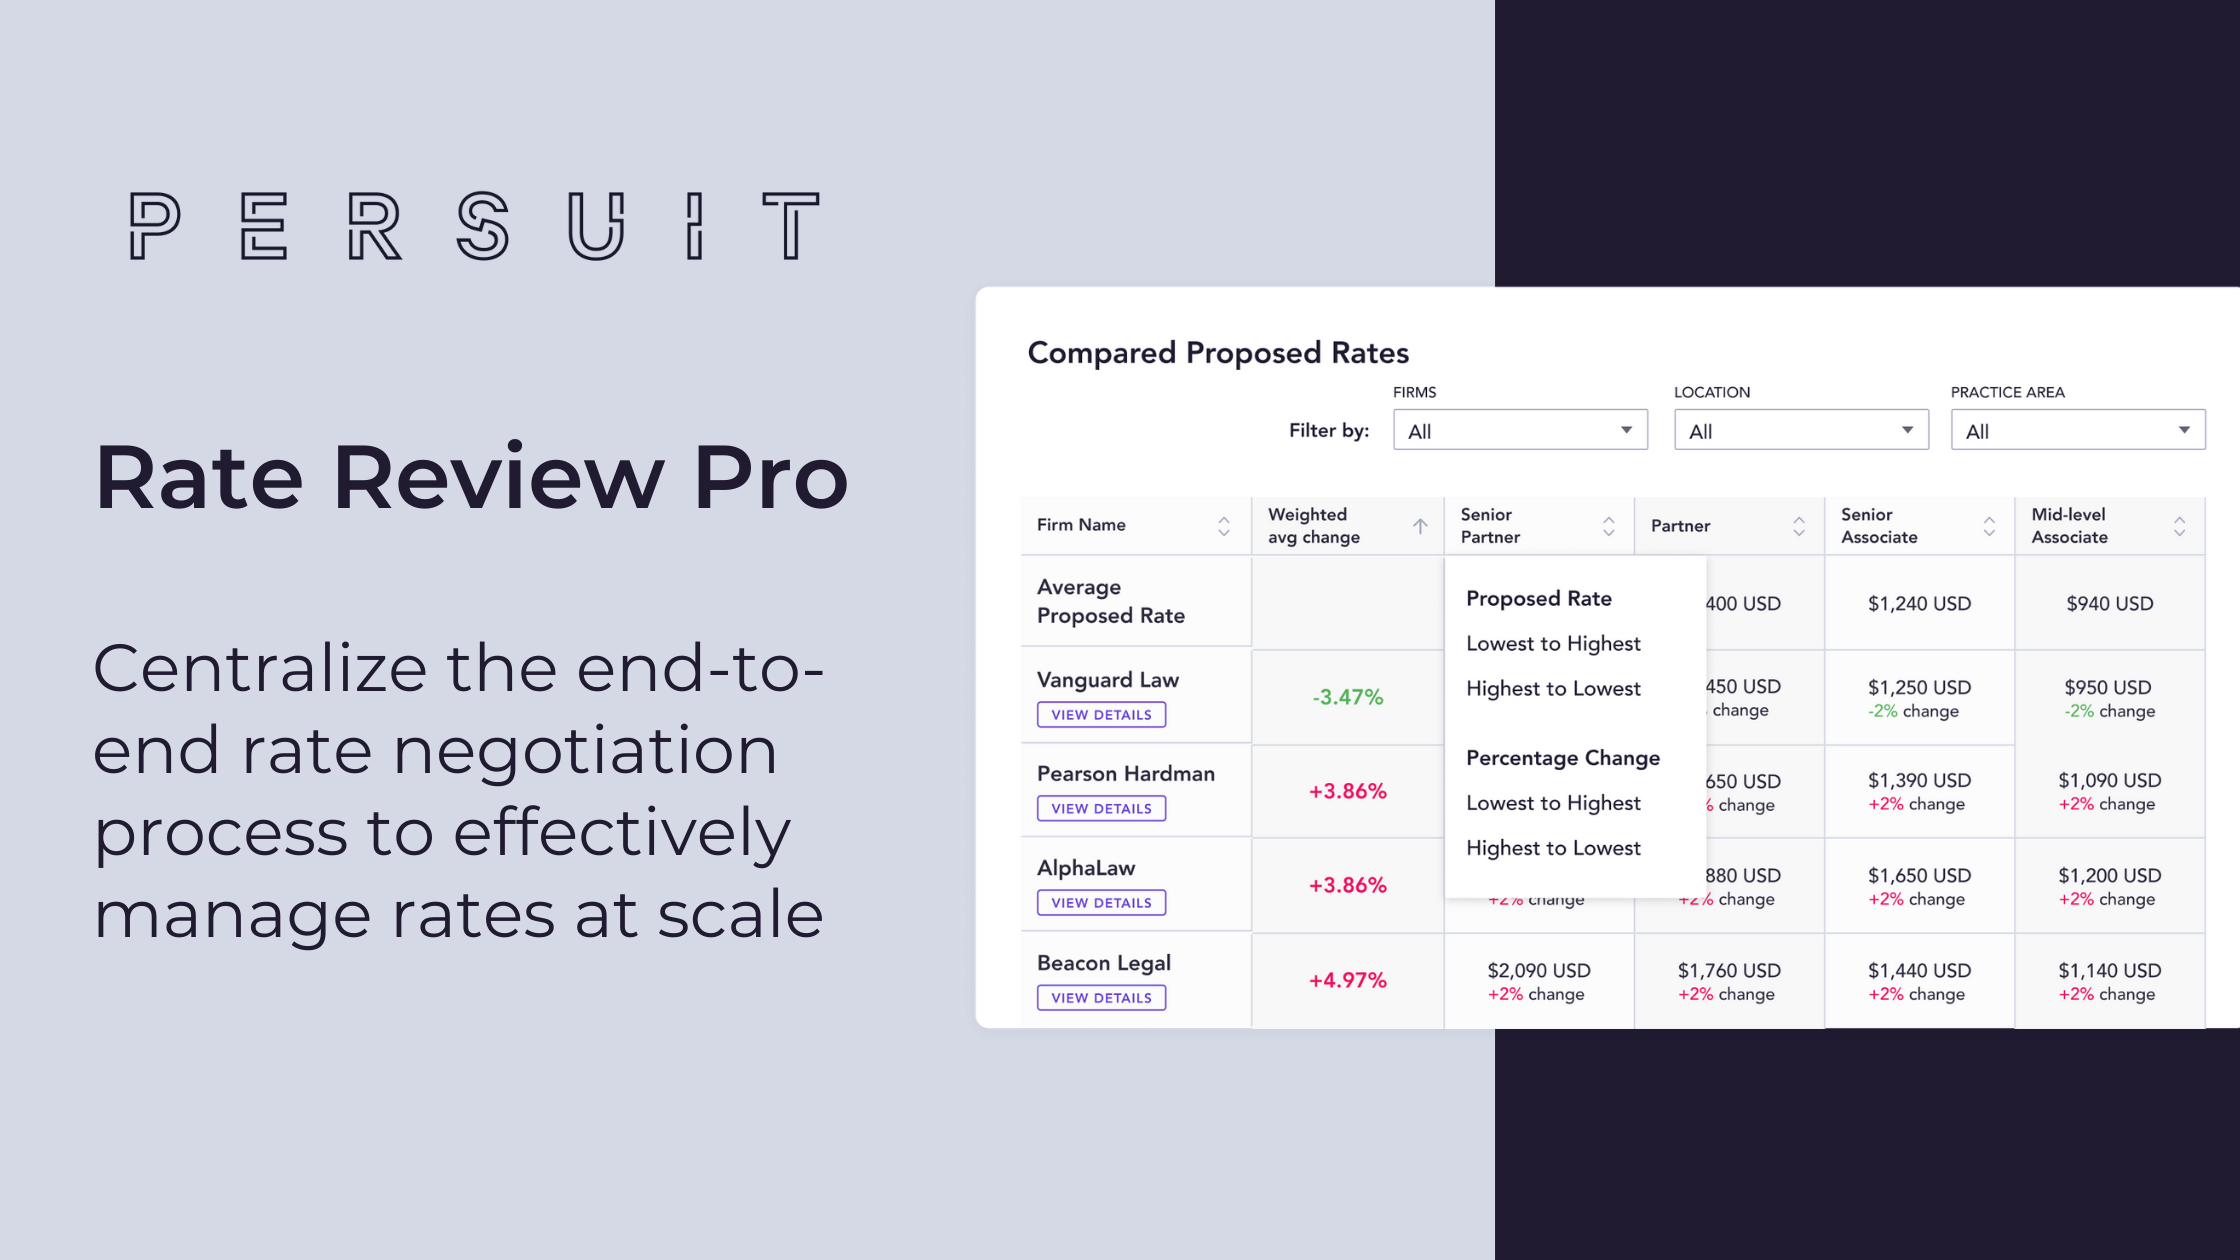 Introducing: Rate Review Pro by PERSUIT